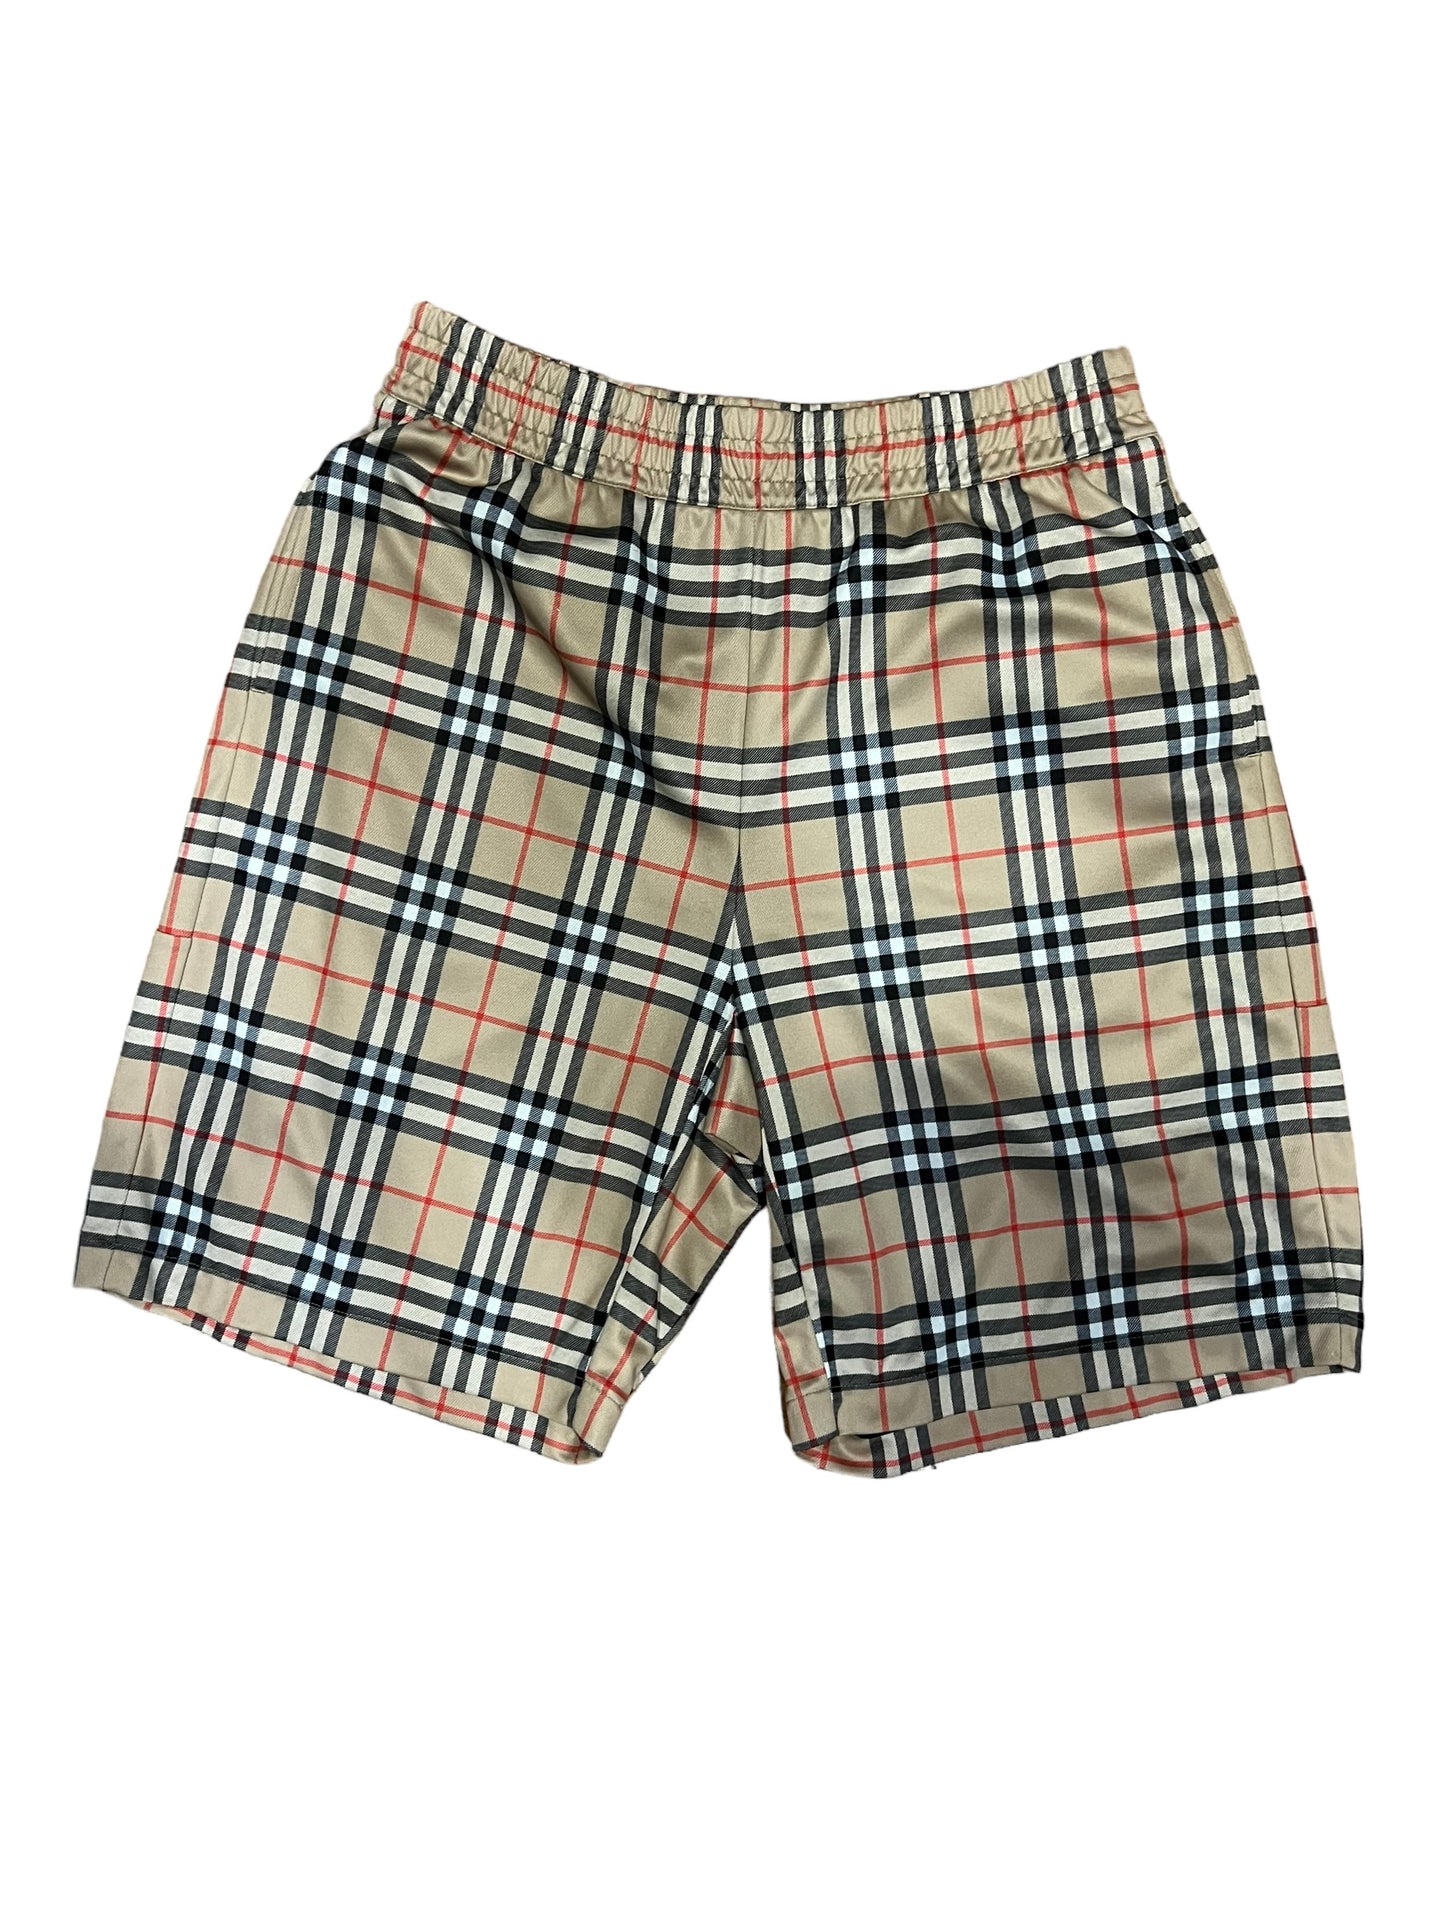 Burberry Check Shorts size S pre-owned